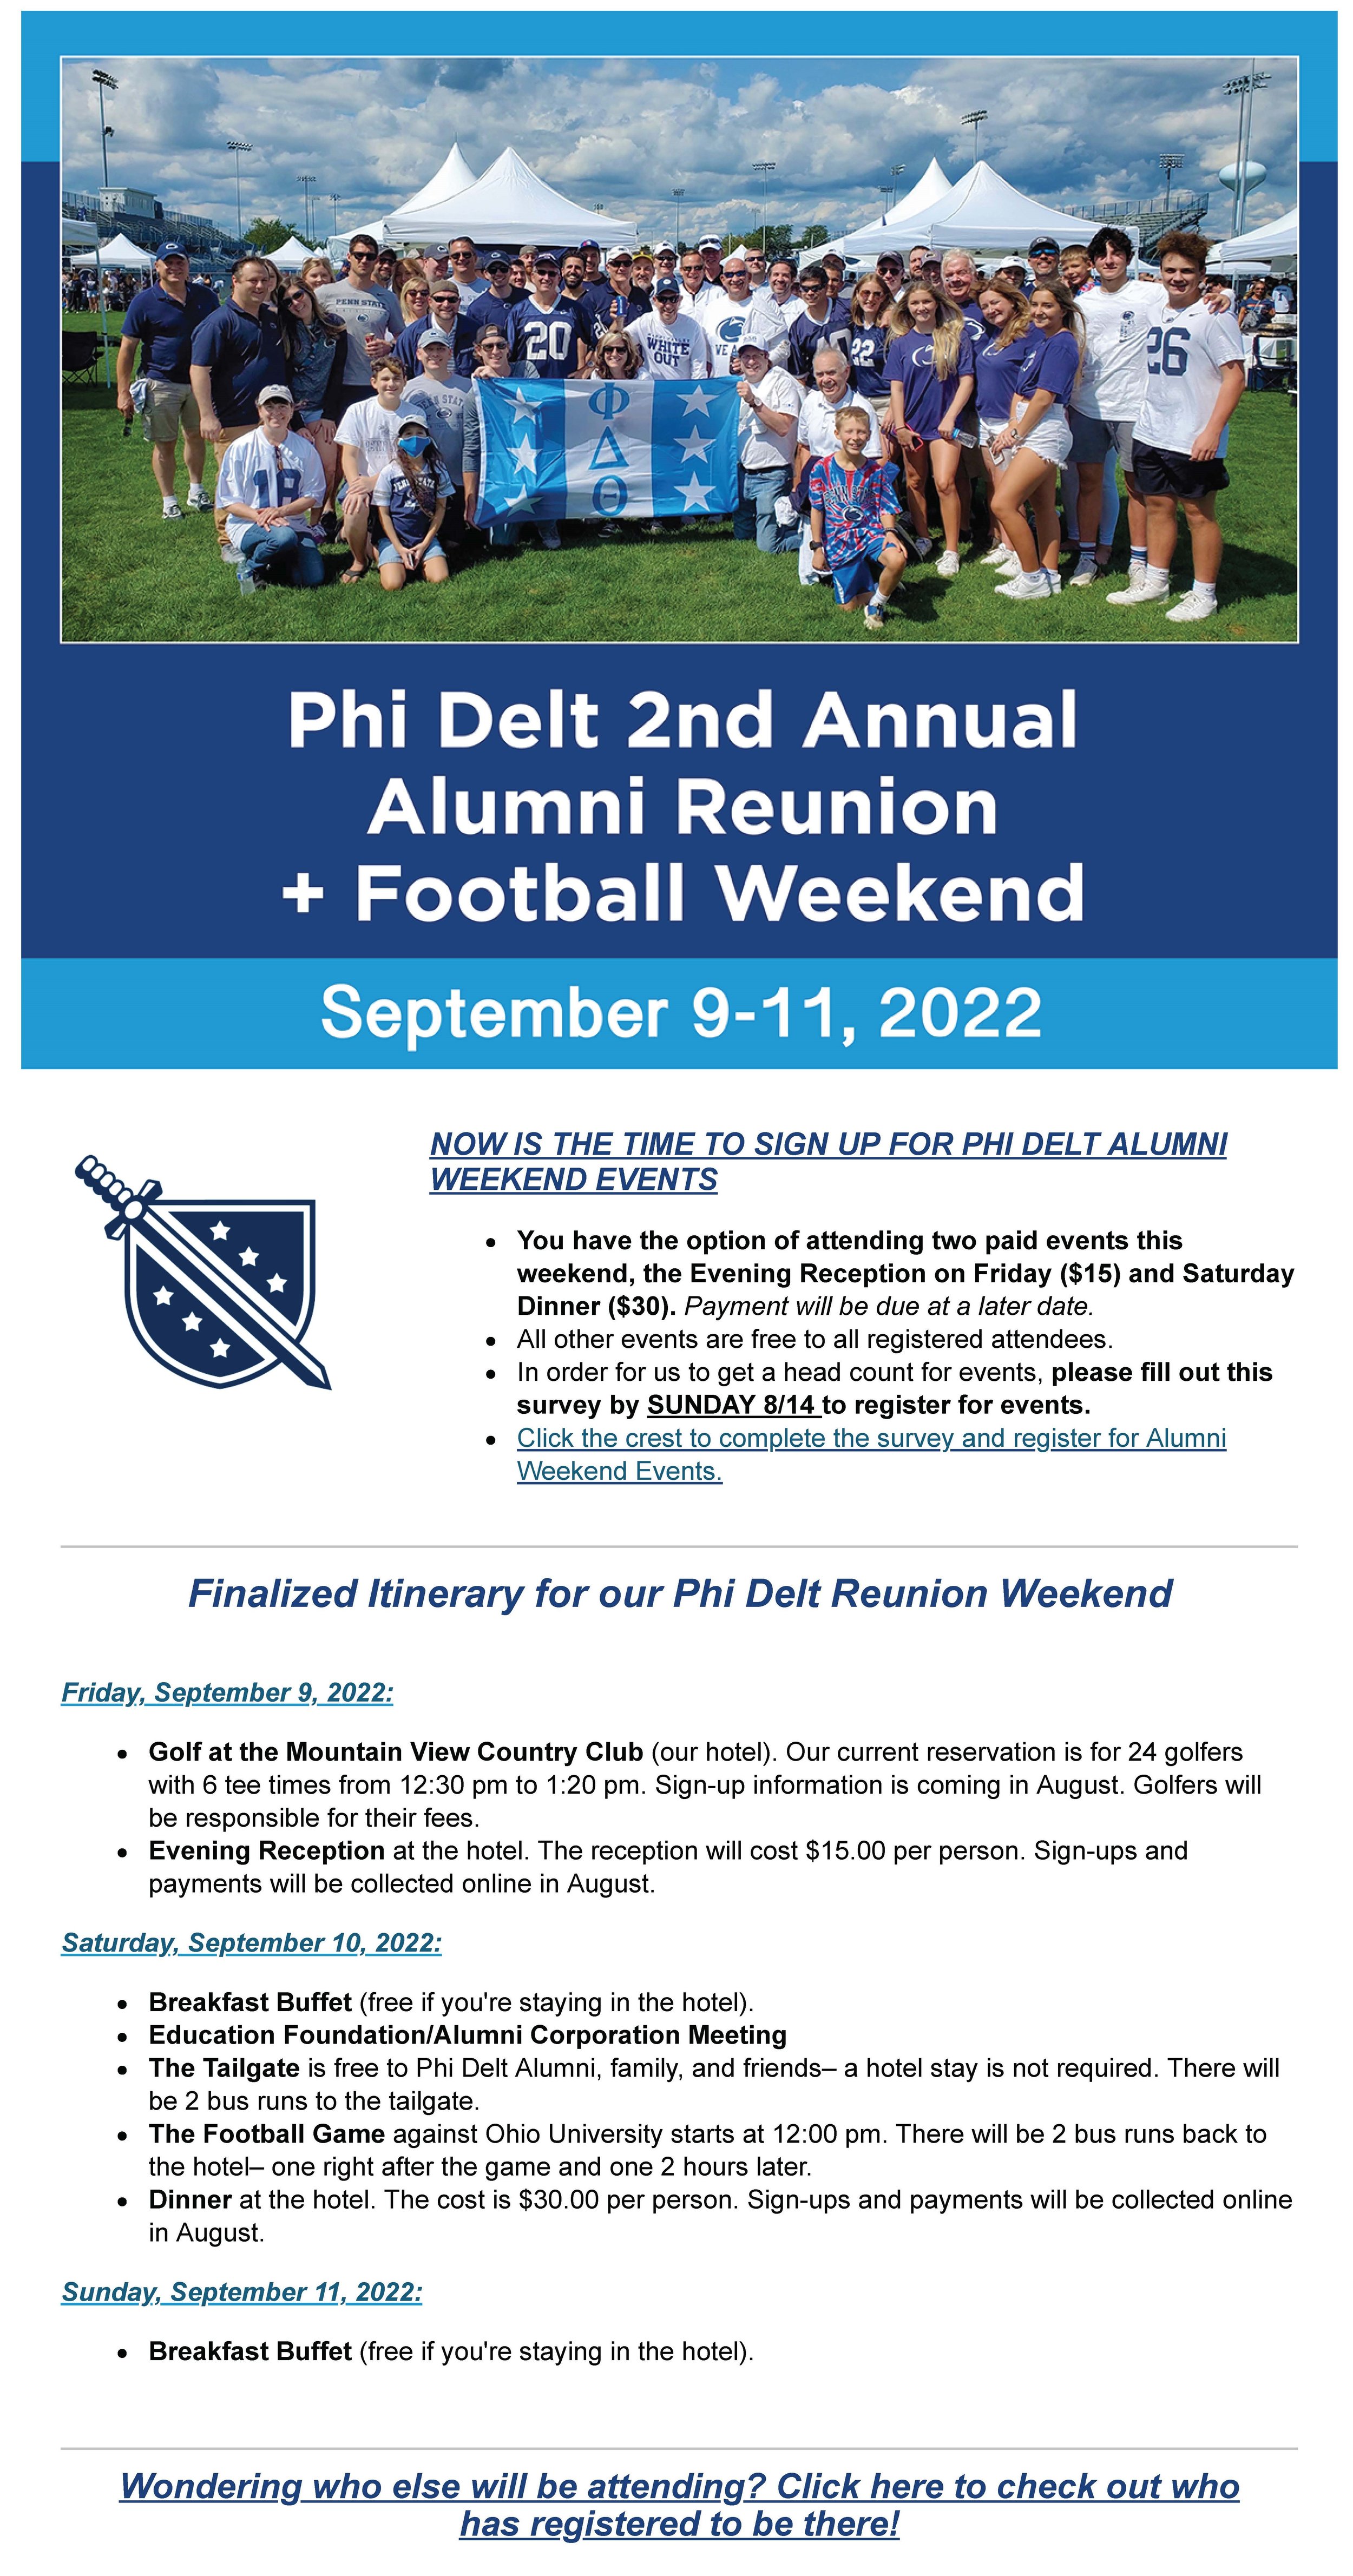 Sign up for Phi Delt Reunion Weekend Events Now_Page_1.jpg